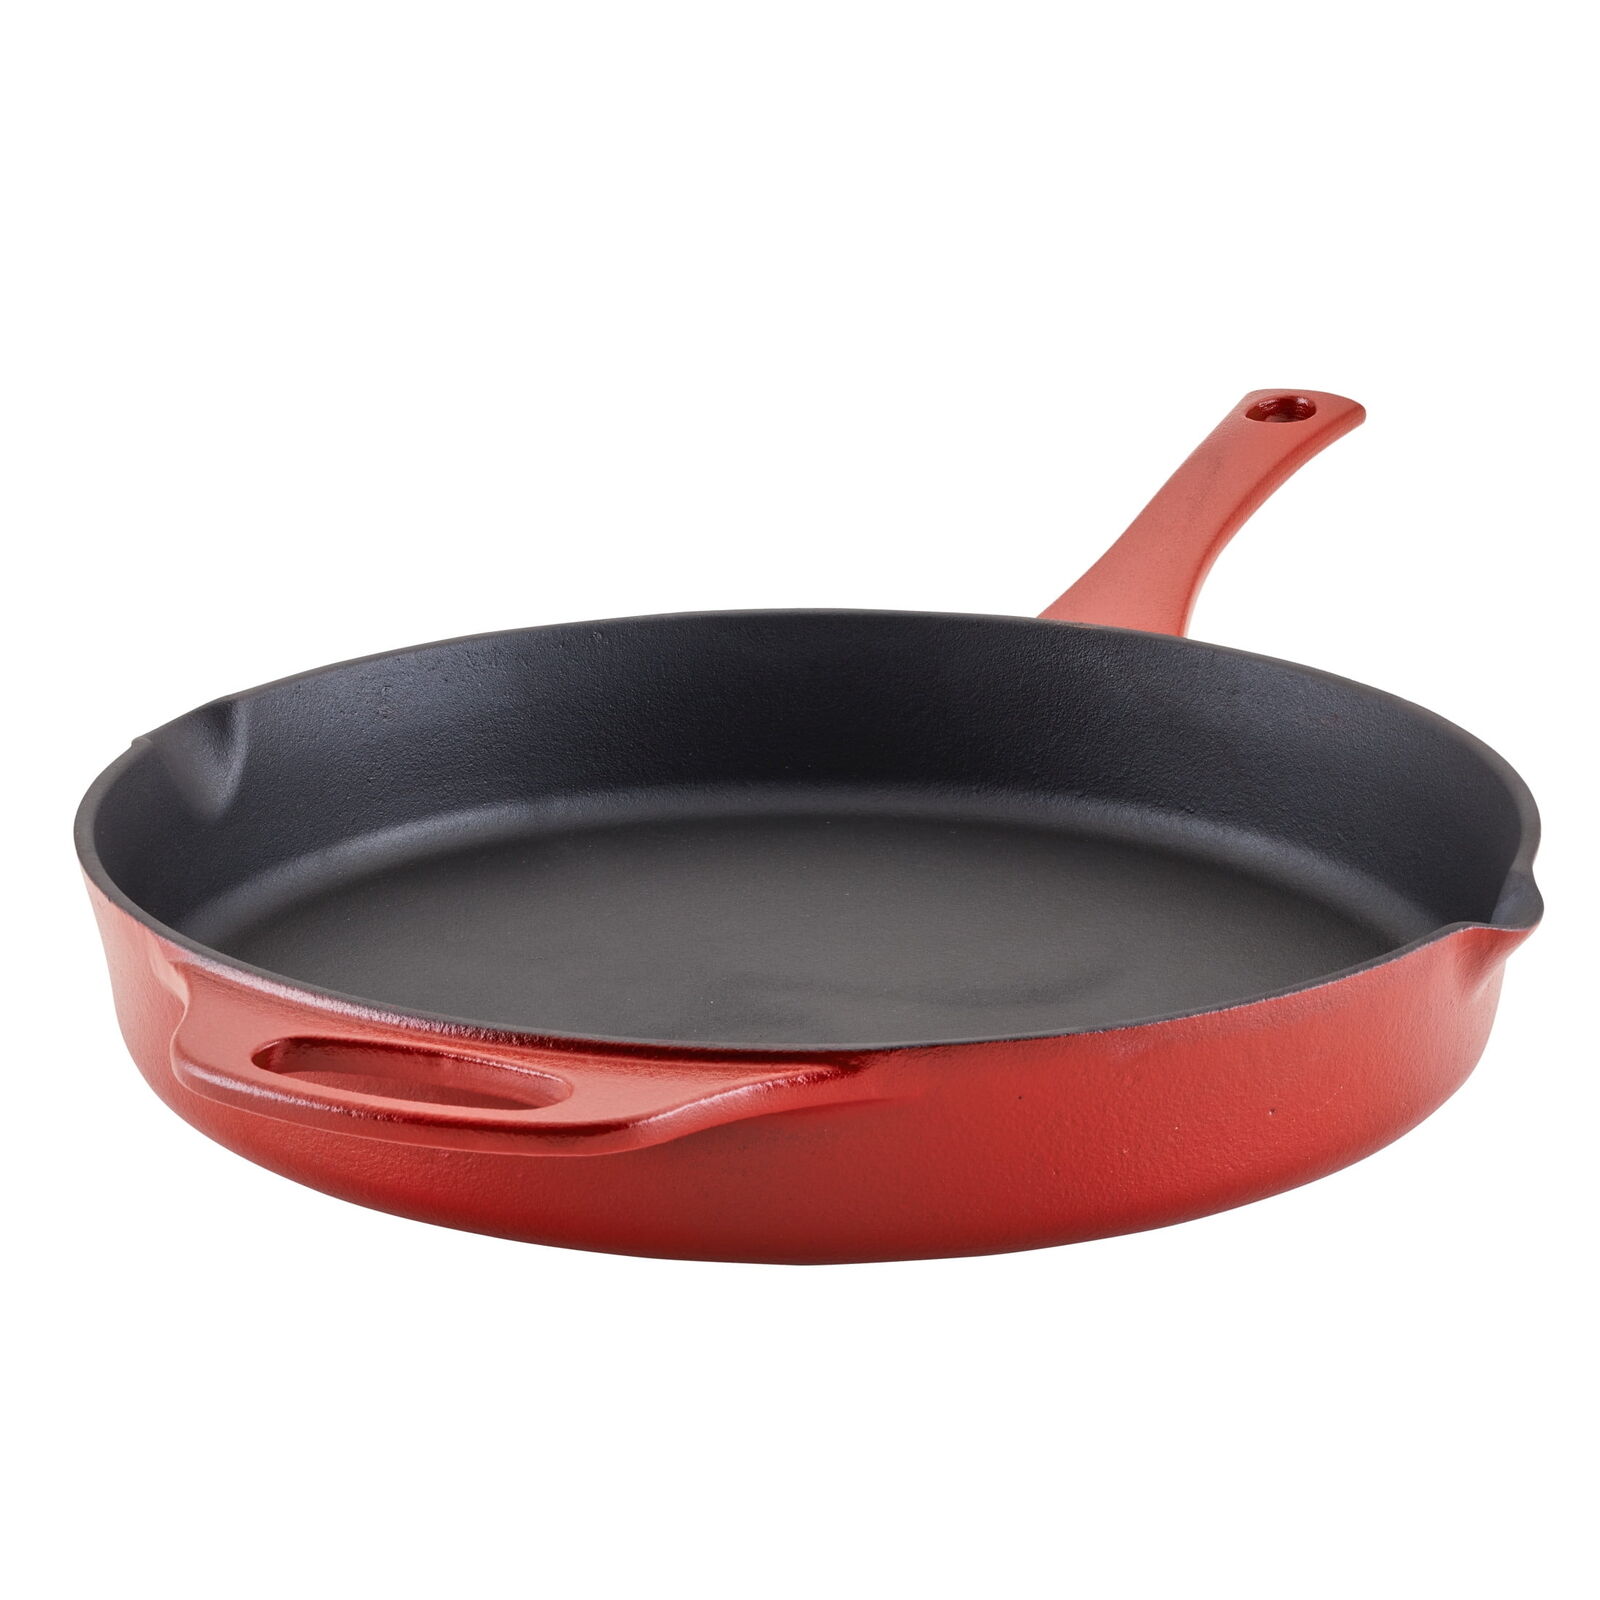 Cast Iron Skillet, 12-Inch, Red